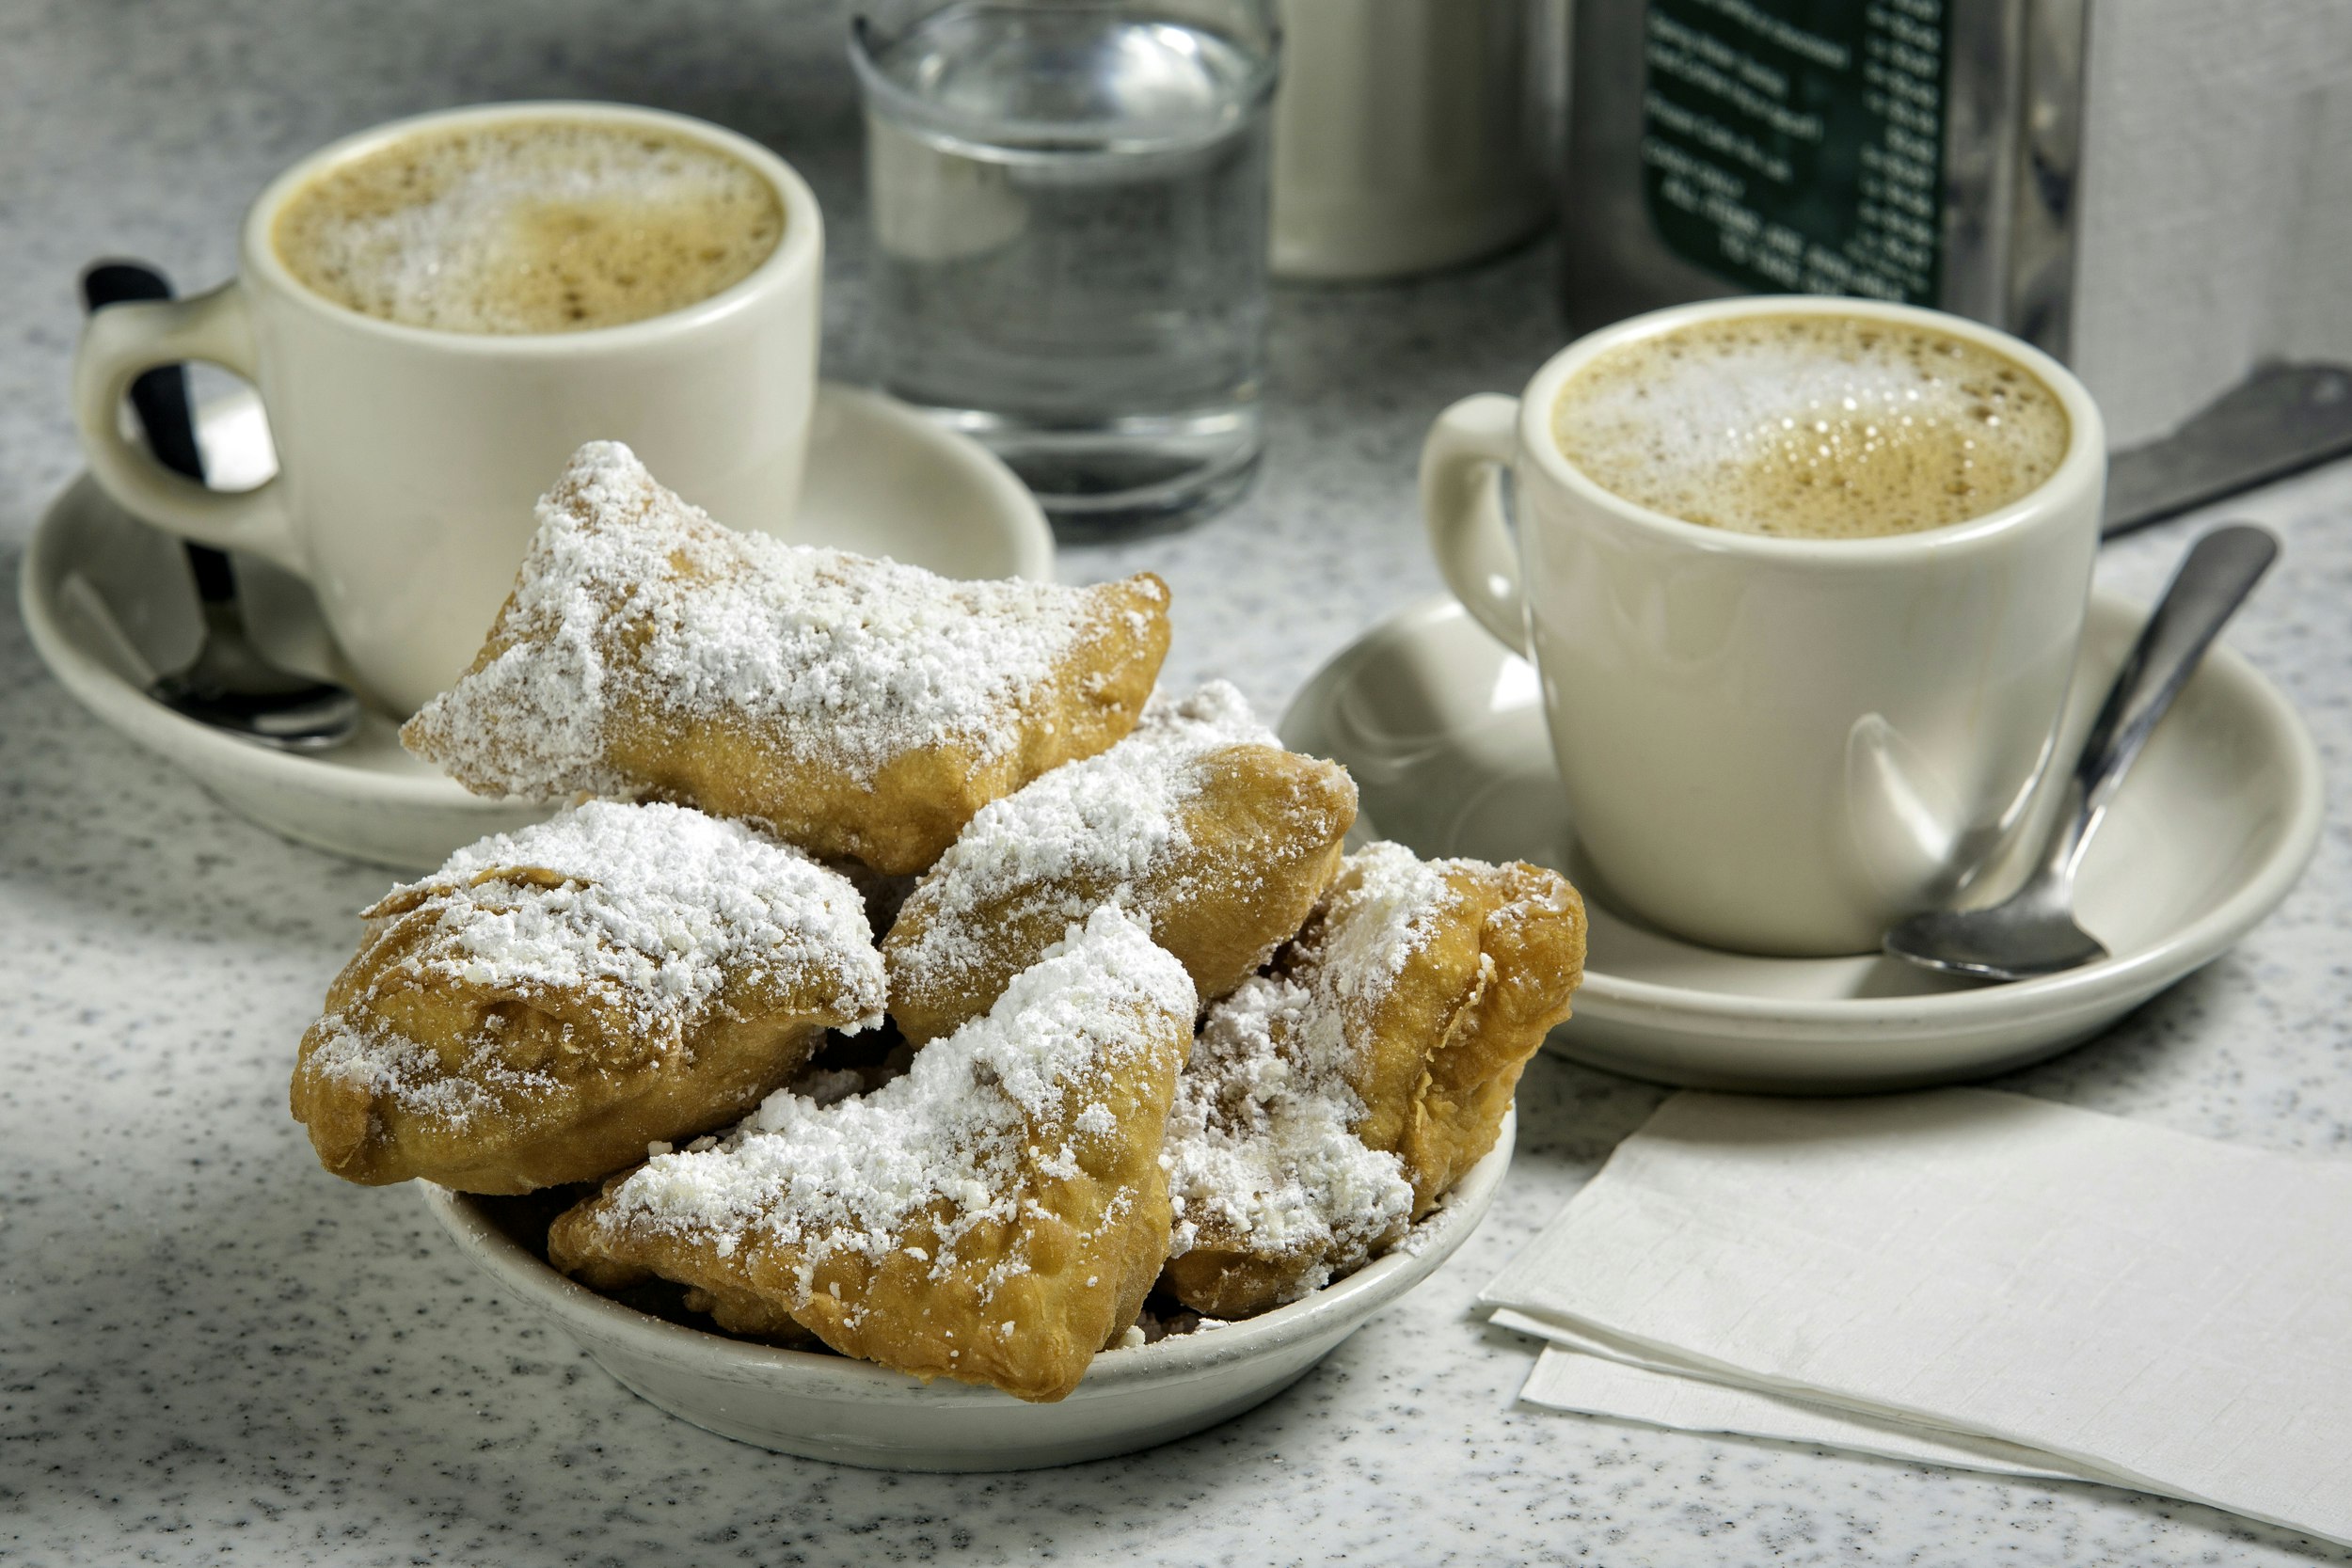 A plate of beignets with coffee